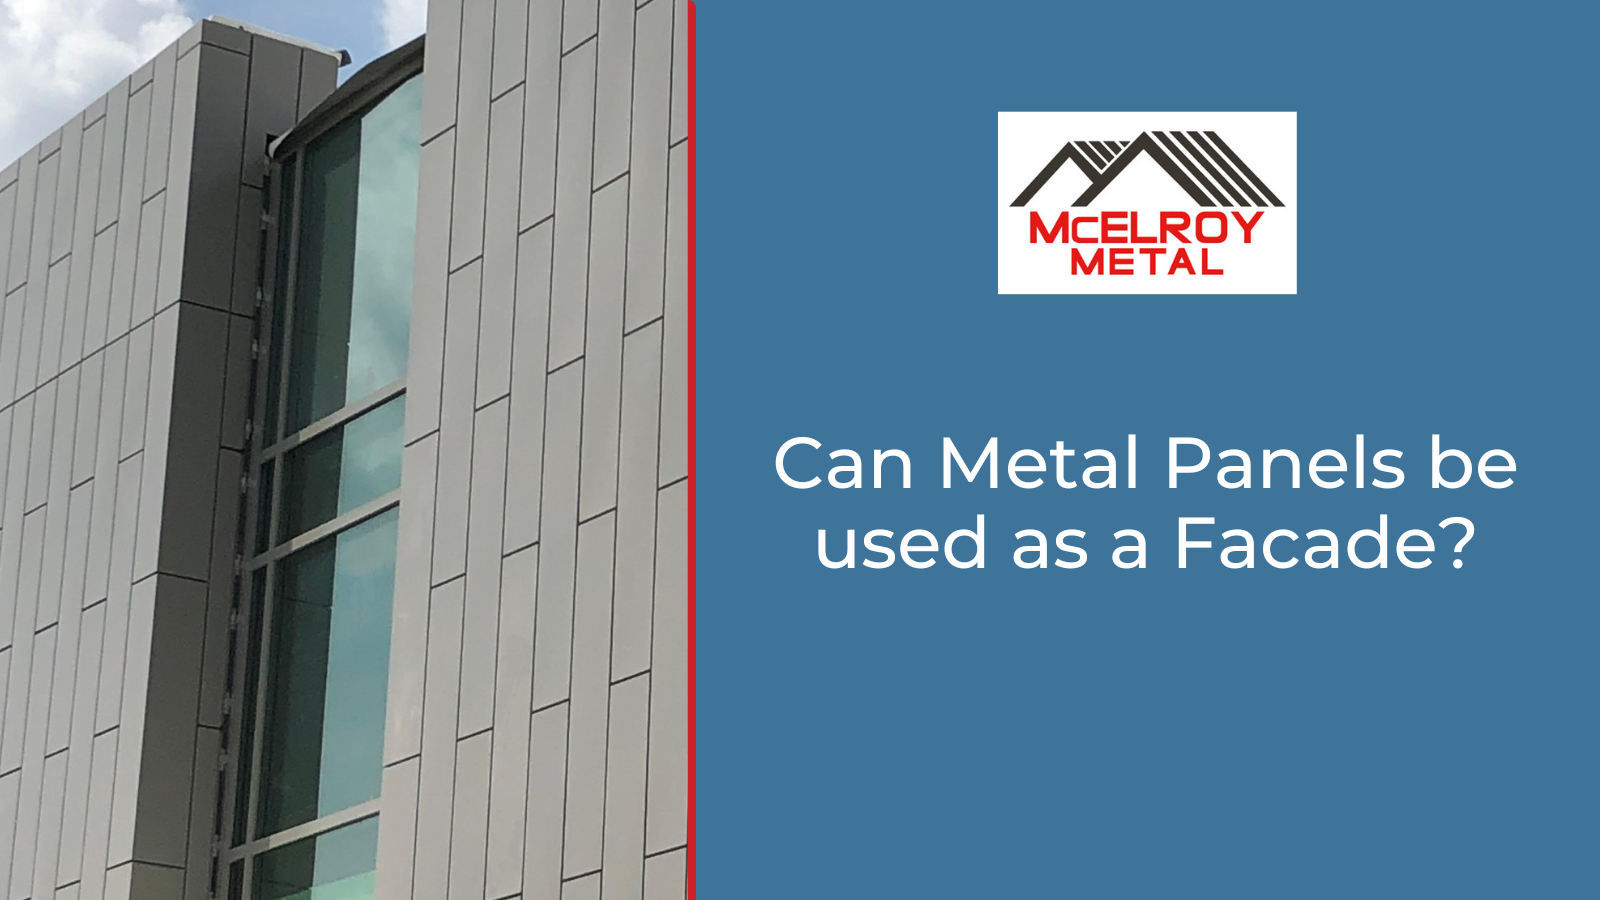 Can Metal Panels be used as a Facade?